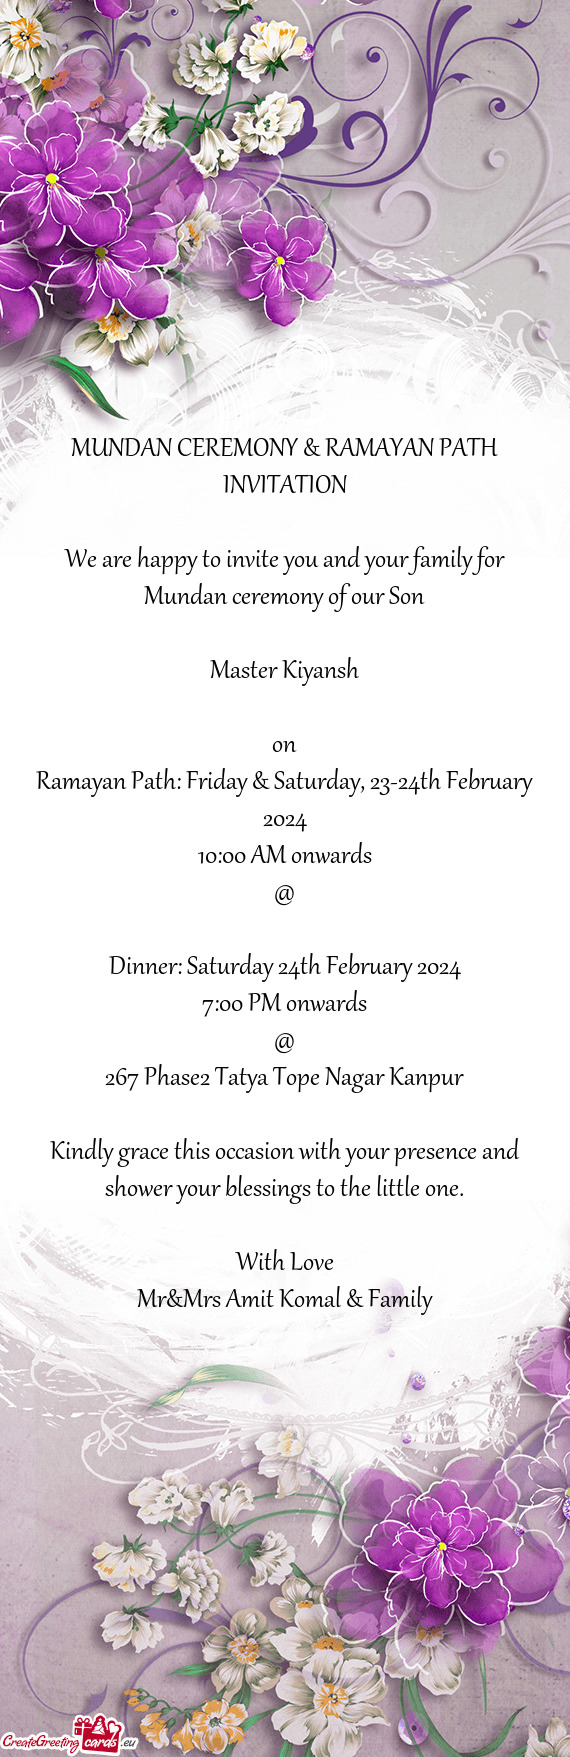 We are happy to invite you and your family for Mundan ceremony of our Son